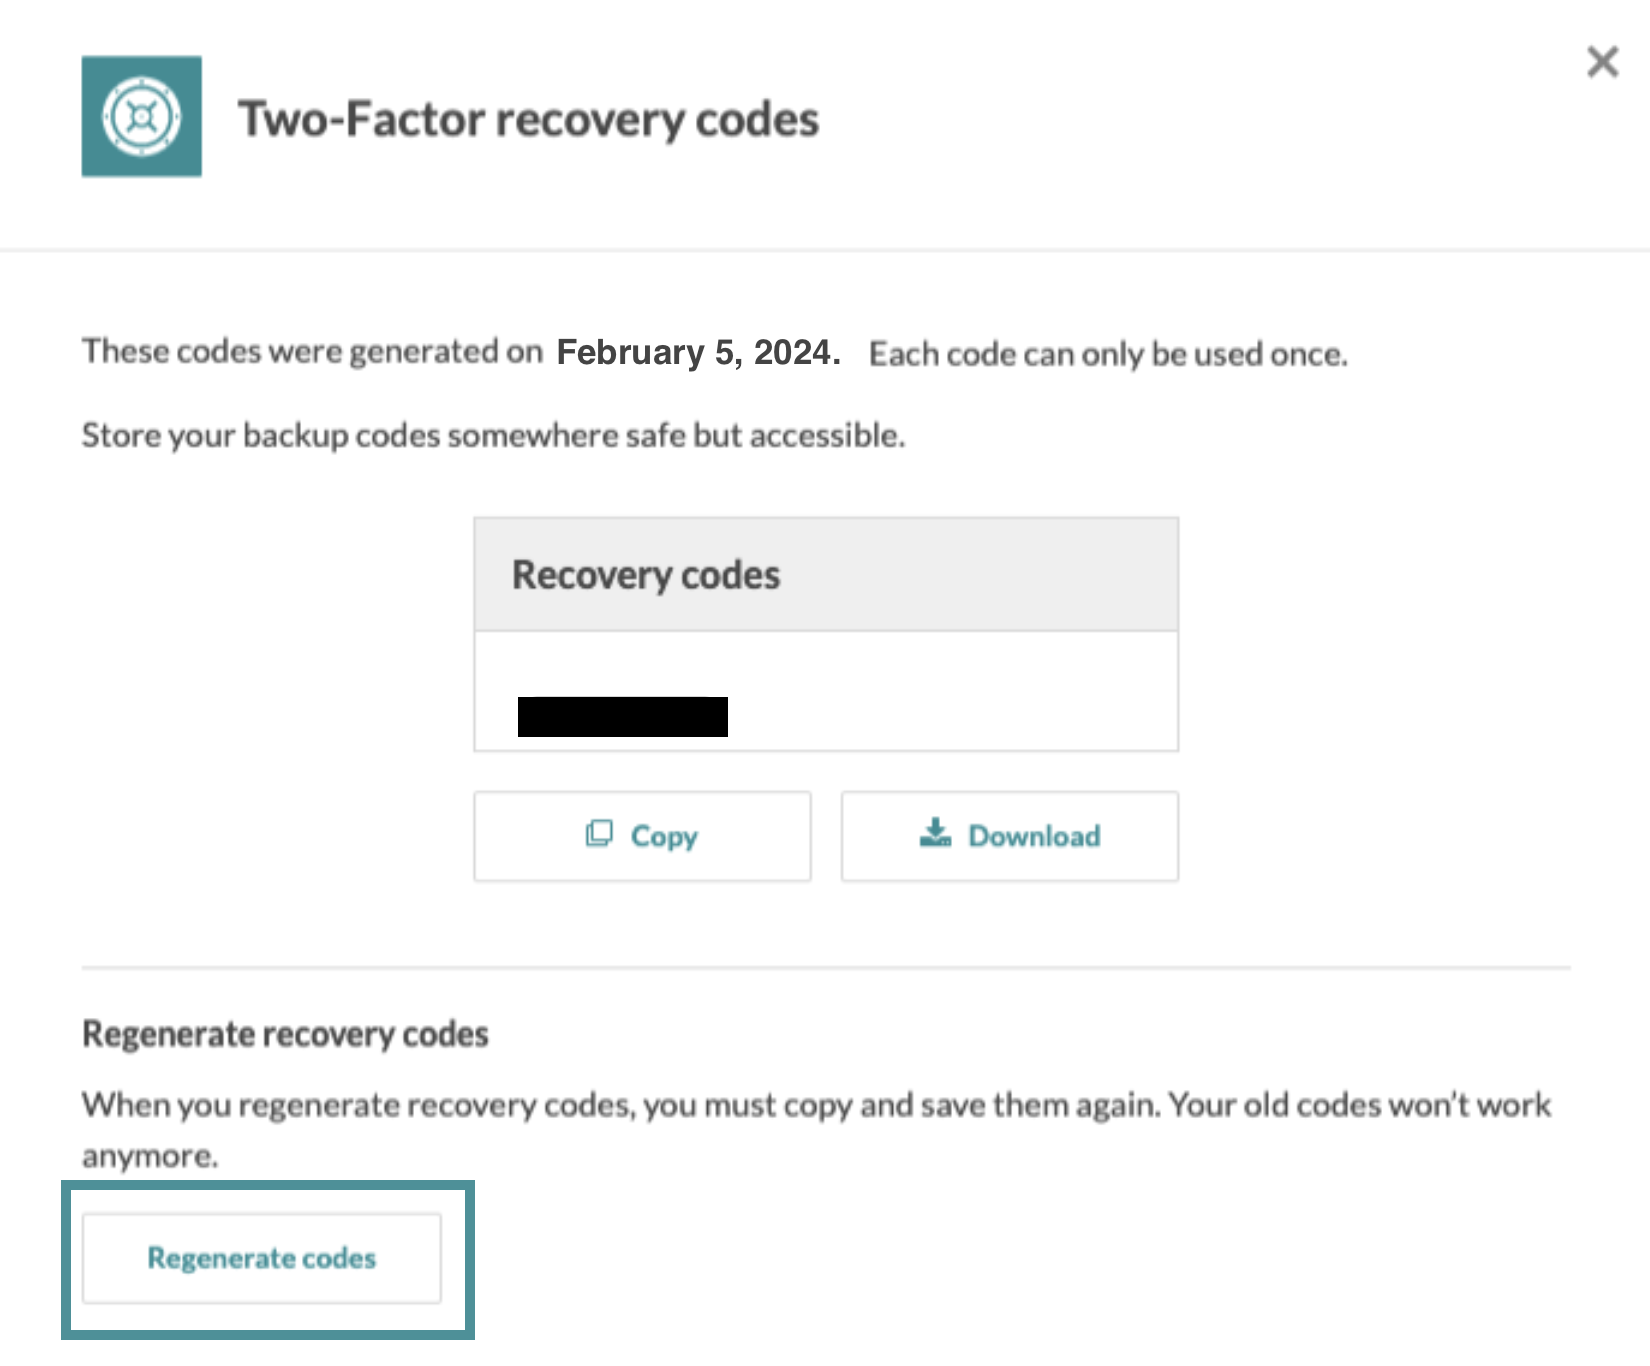 Generate new recovery codes